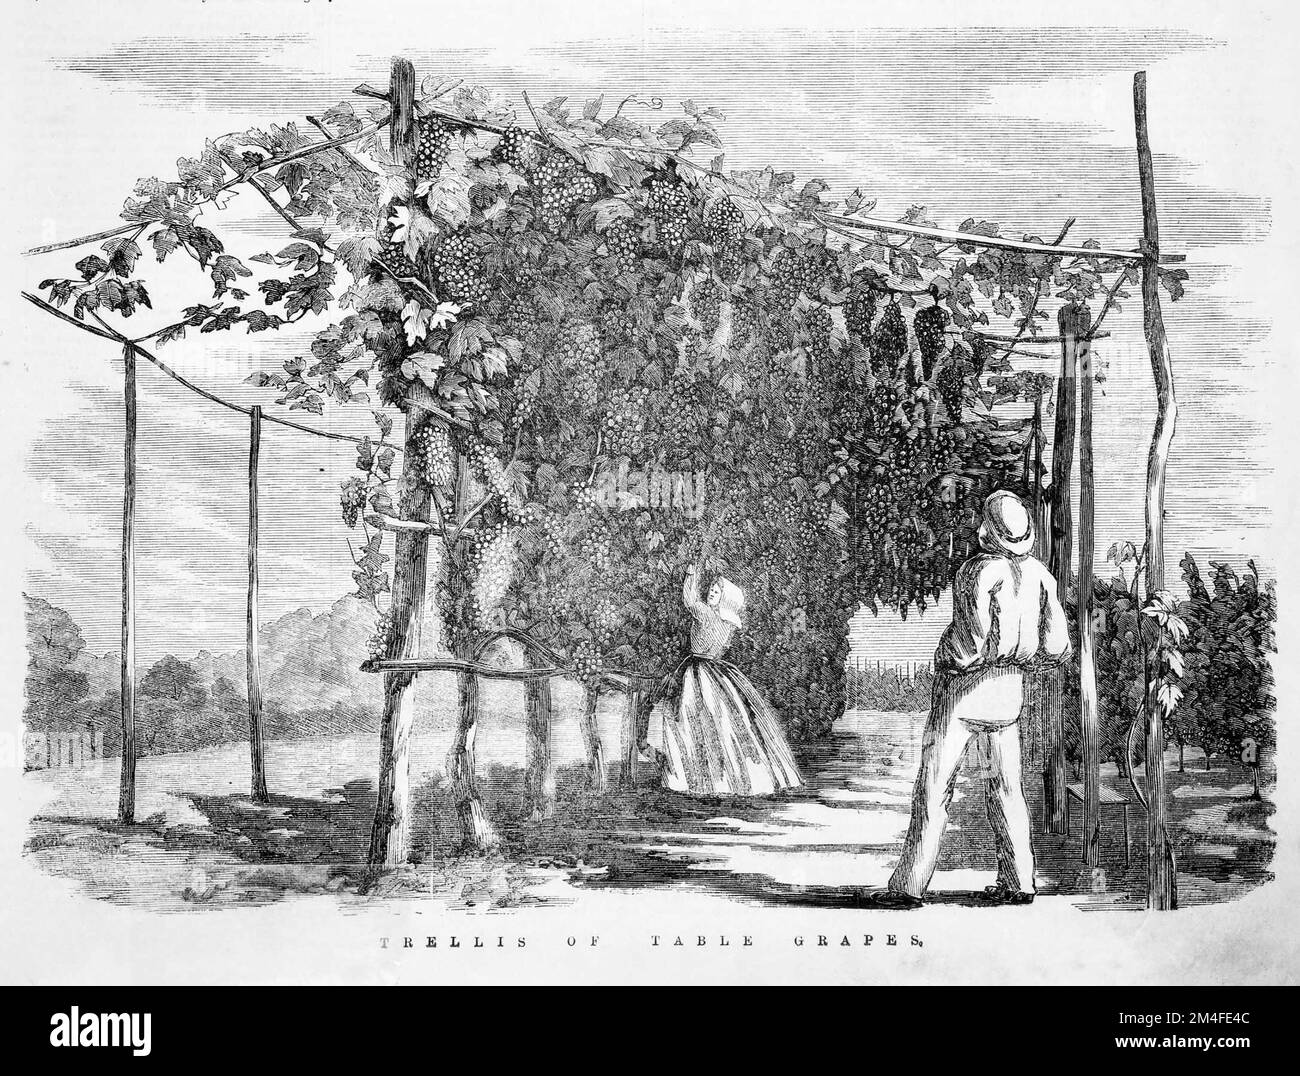 Trellis Of Table Grapes. 1866. Shows large grape vines at the Epsom Vineyards at Sandhurst full with fruit being picked by a woman, man looking on. Stock Photo